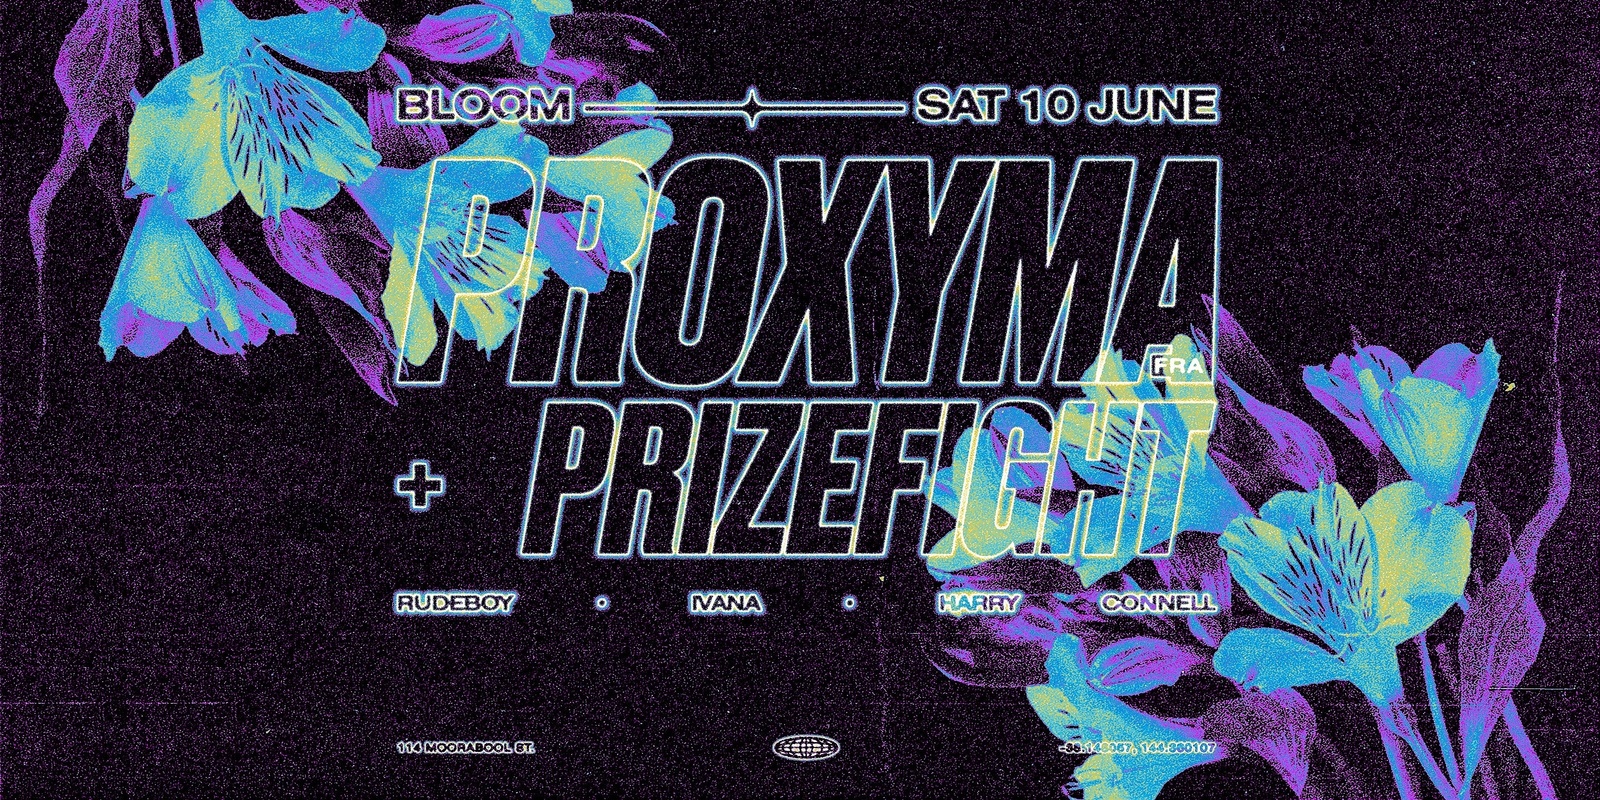 Banner image for Bloom ▬ PROXYMA + Prizefight 